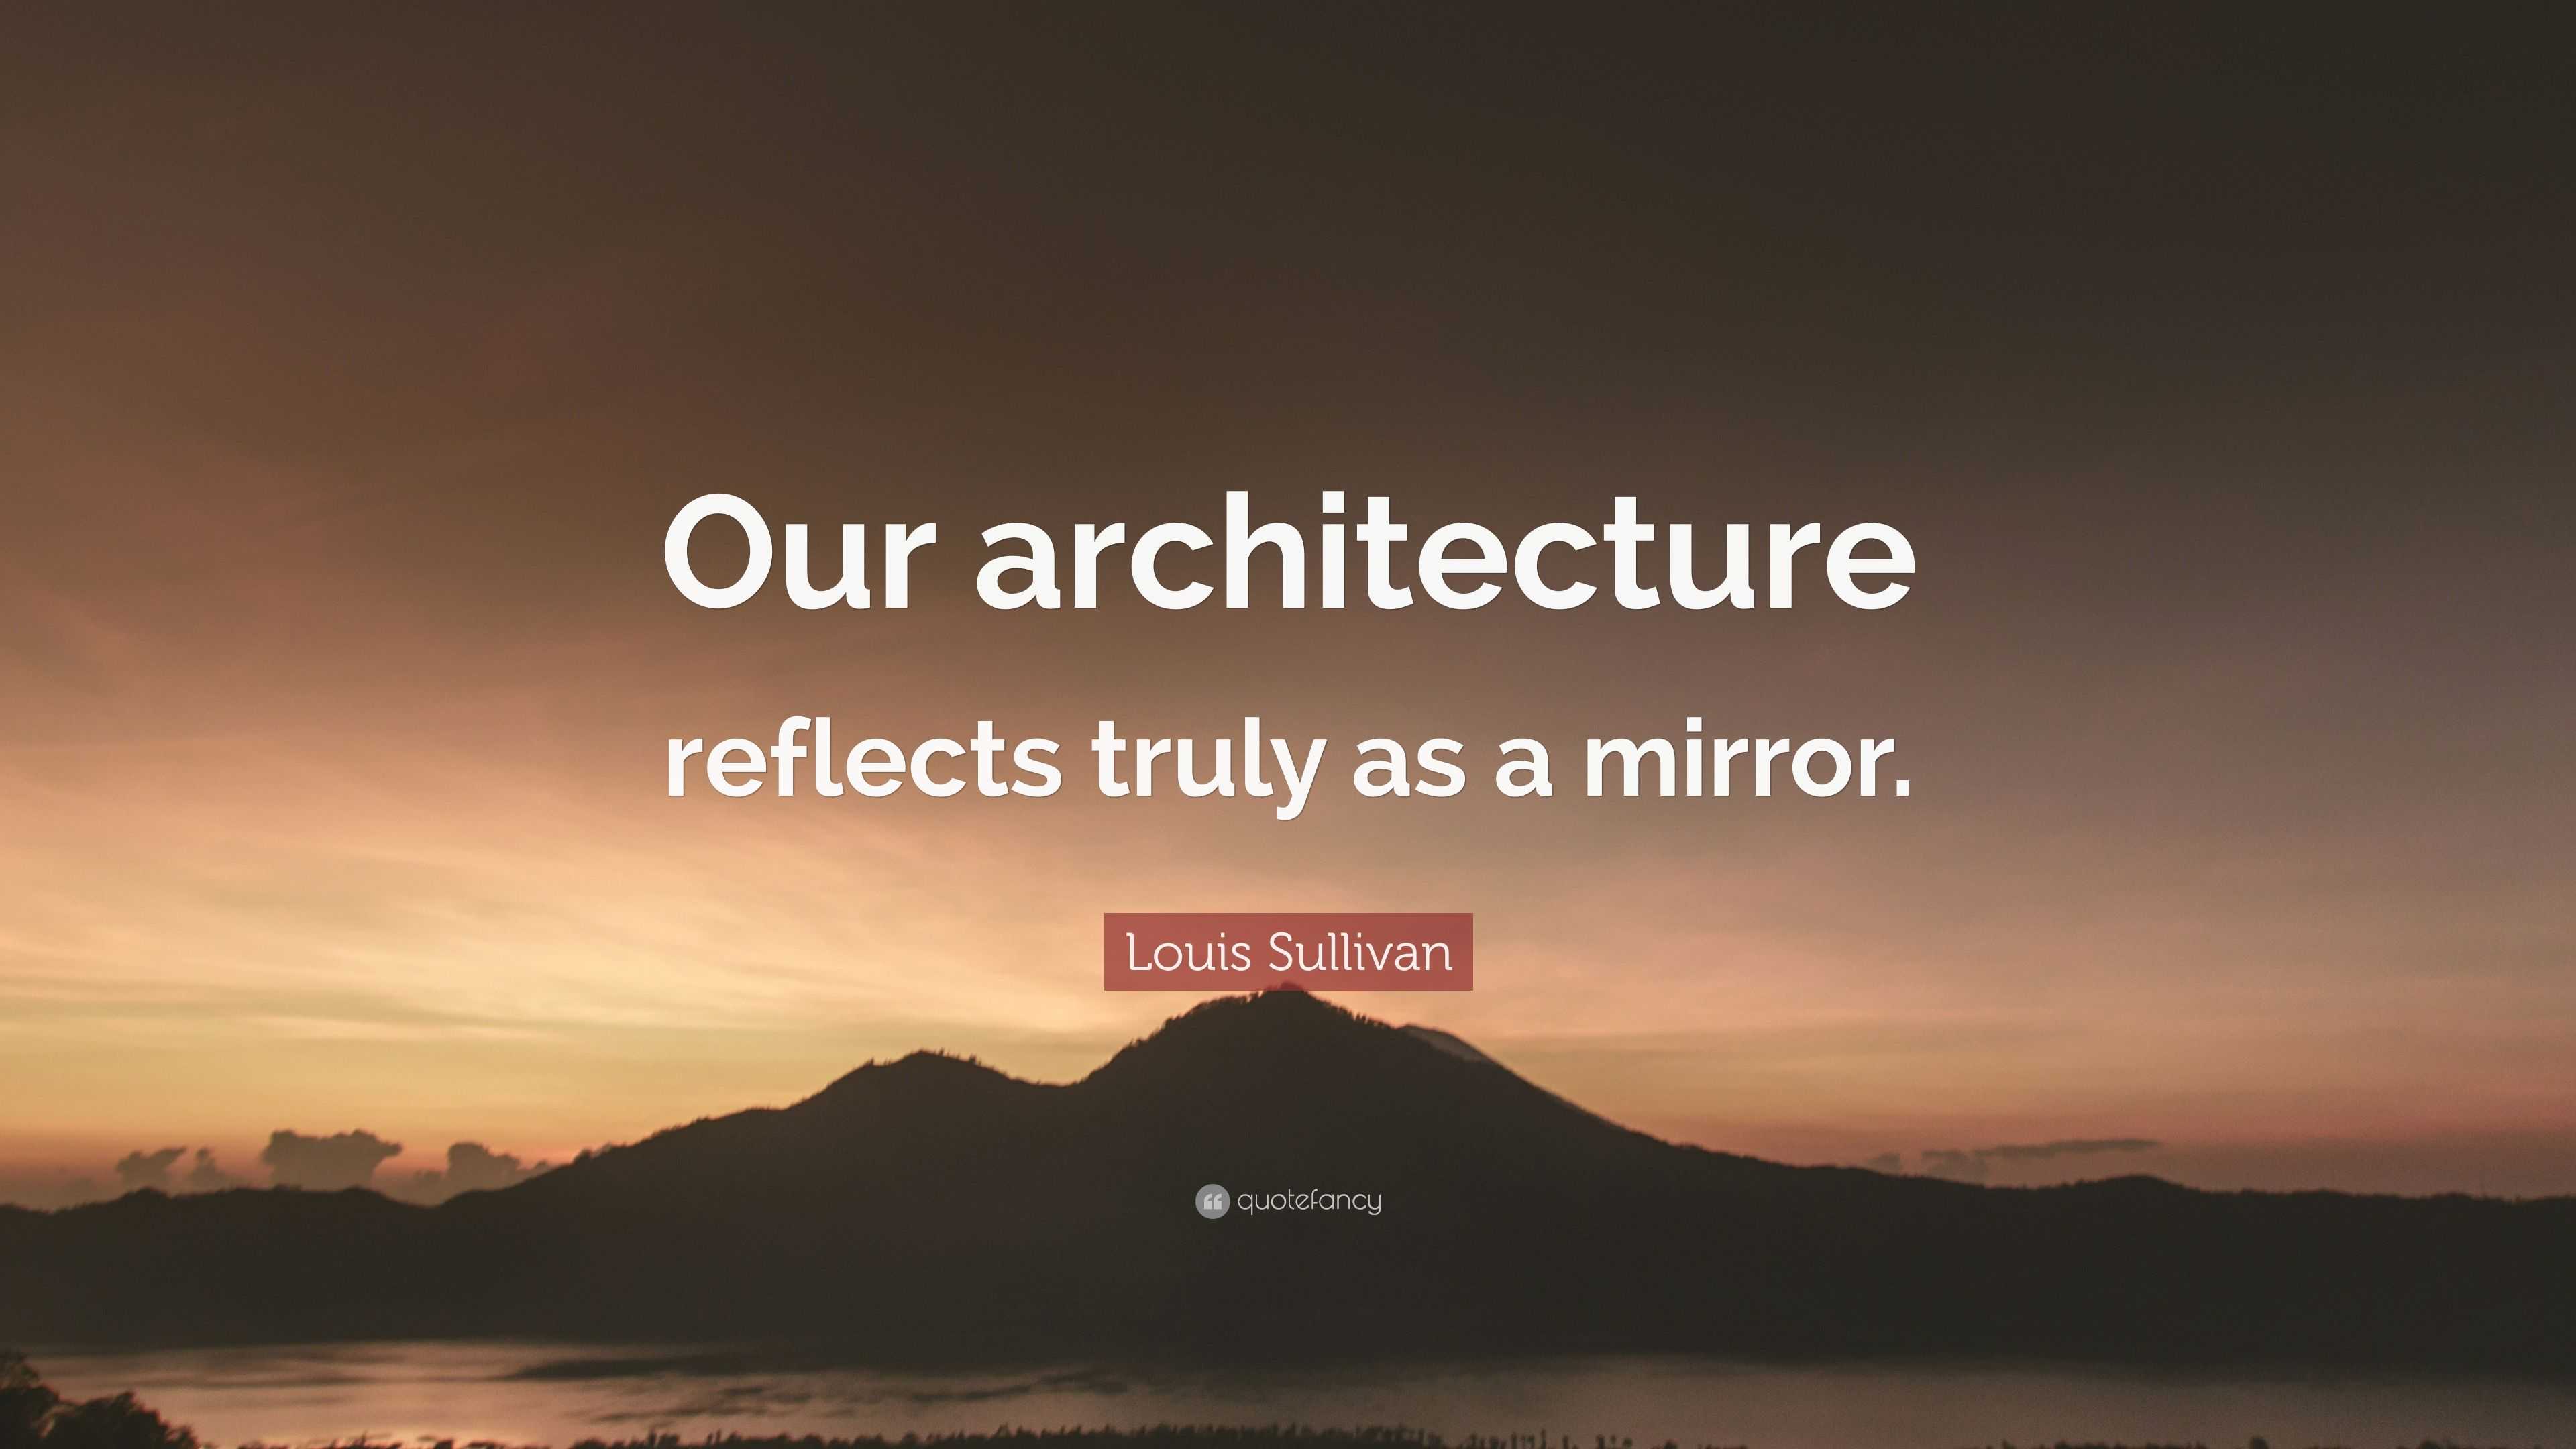 Louis Sullivan Quote: “Our architecture reflects truly as a mirror.”